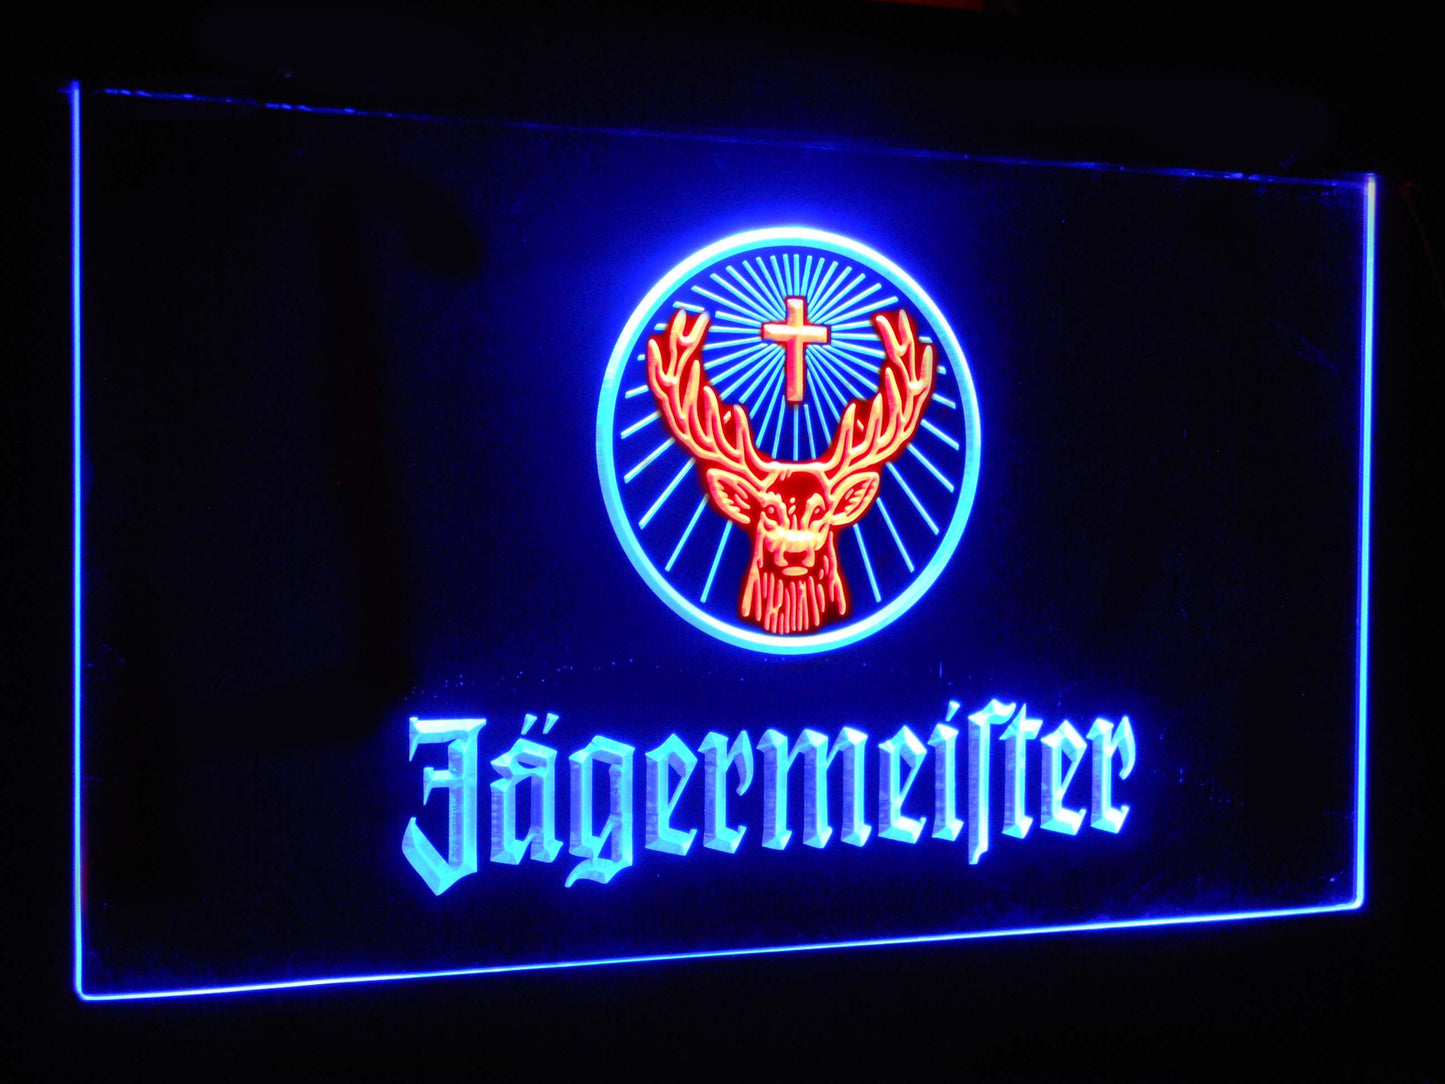 Jagermeister Deer Head Dual Color Led Neon Light Signs st6-a0288 by Woody Signs Co. - Handmade Crafted Unique Wooden Creative